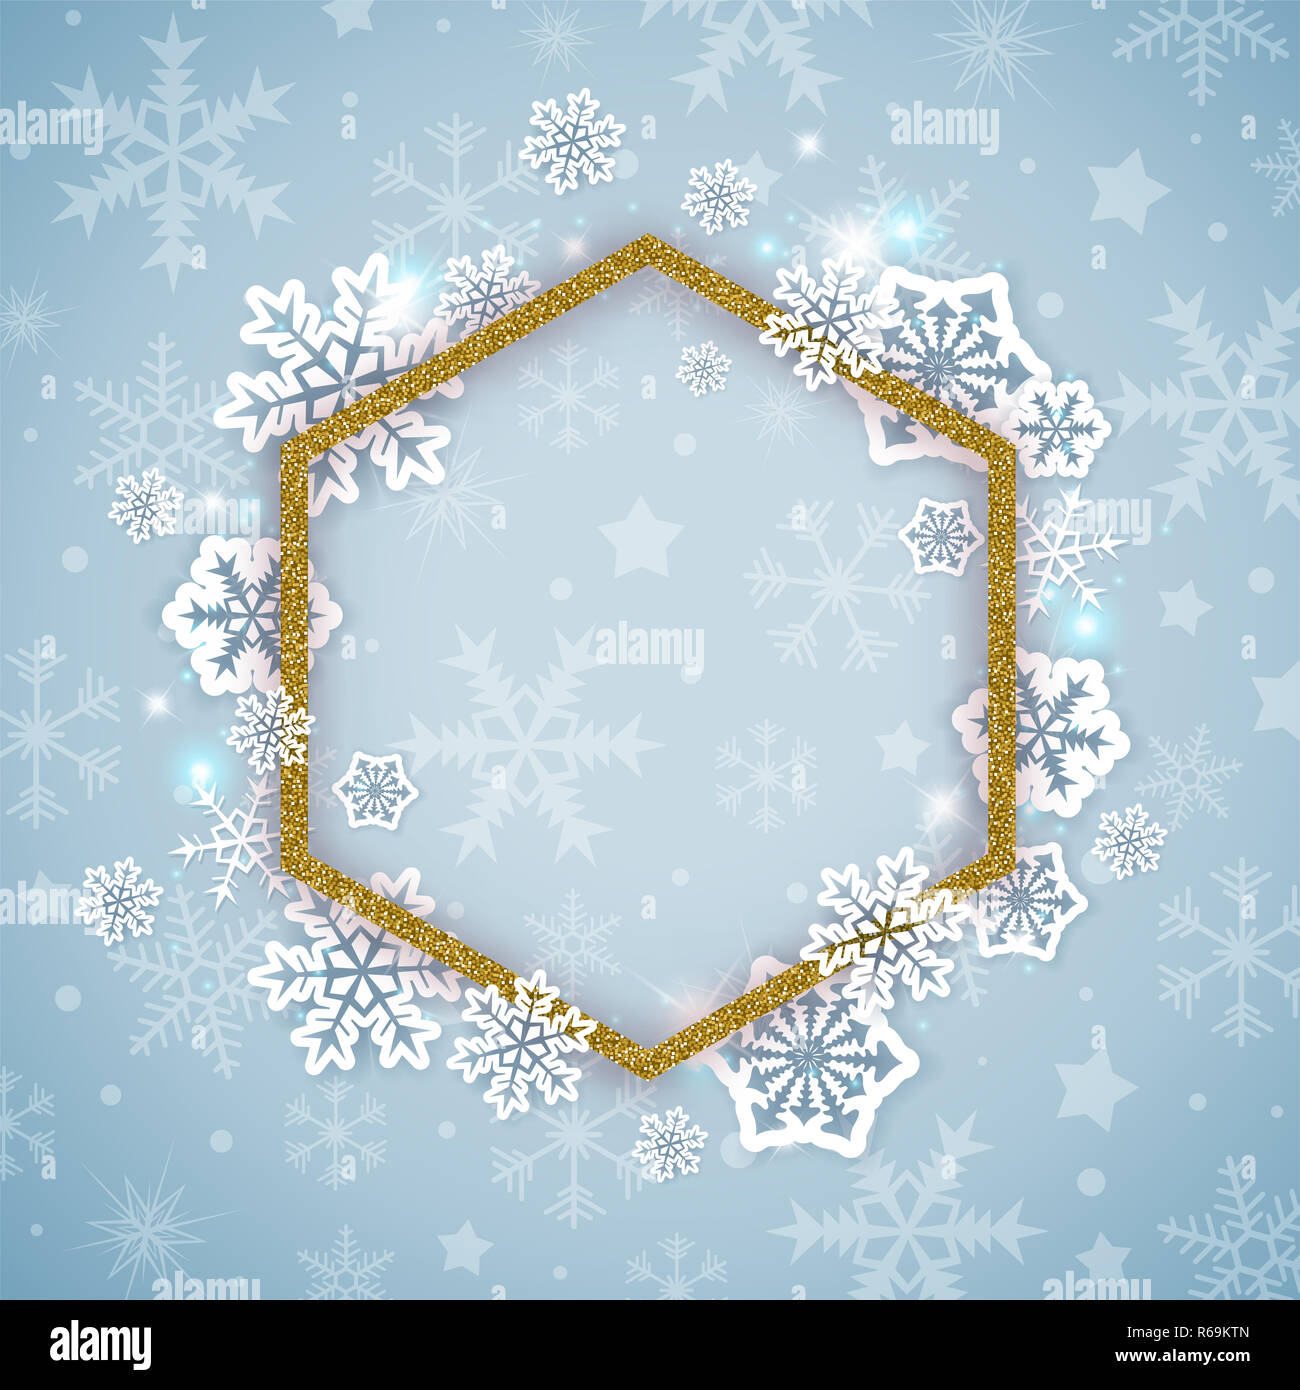 Christmas background with golden glittering frame and white snowflakes. New year greeting card. Stock Photo